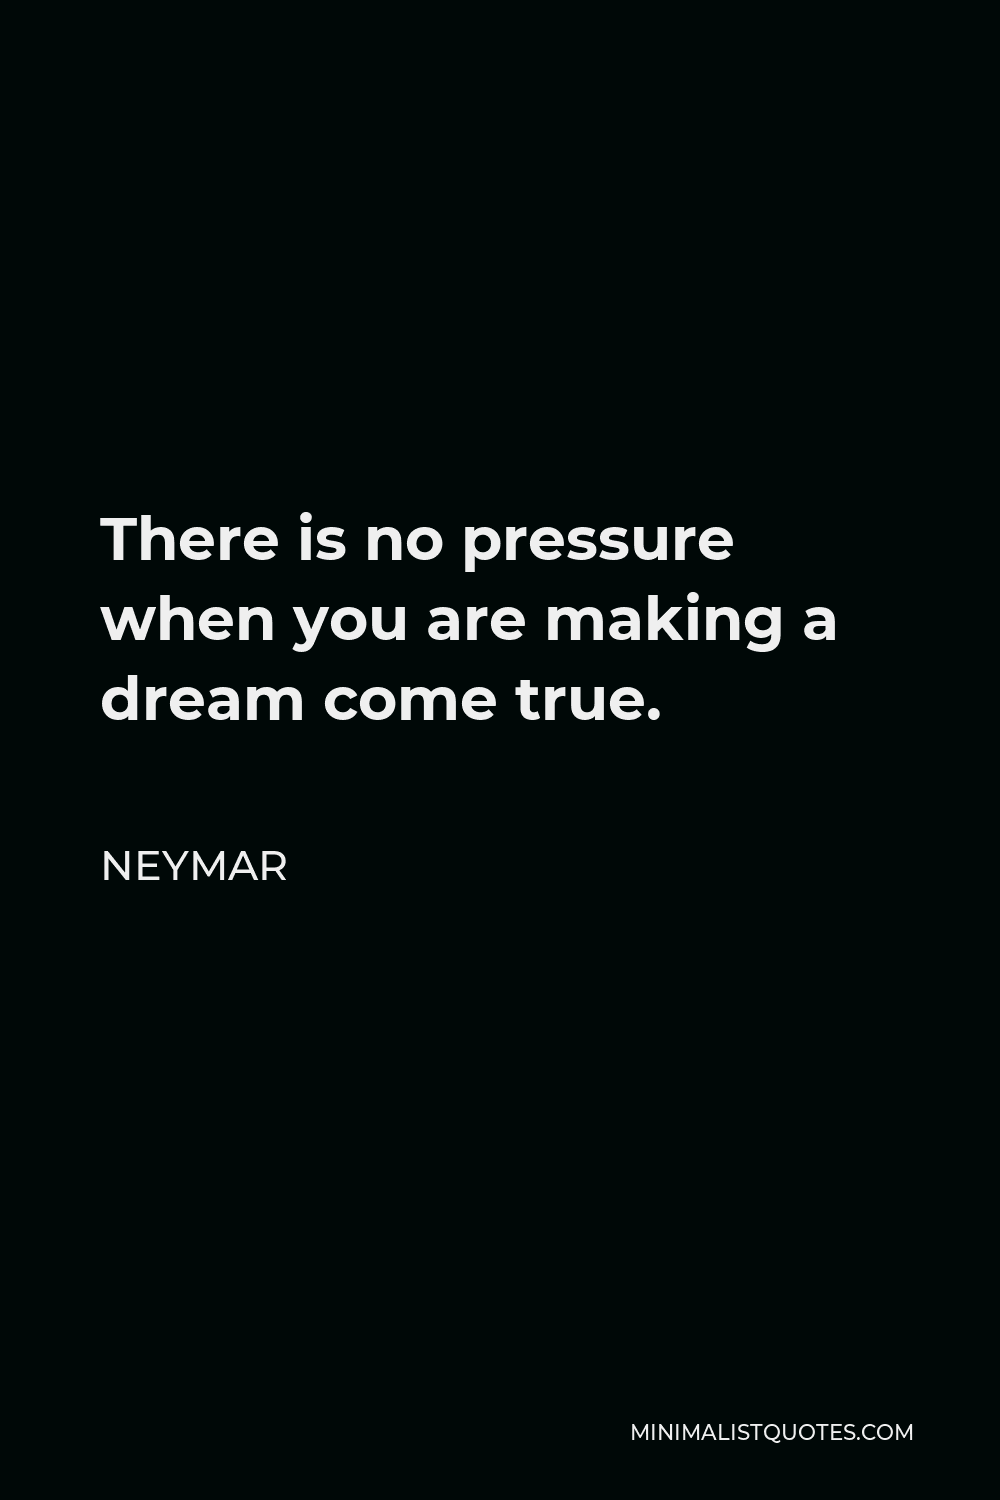 Neymar Quote - There is no pressure when you are making a dream come true.